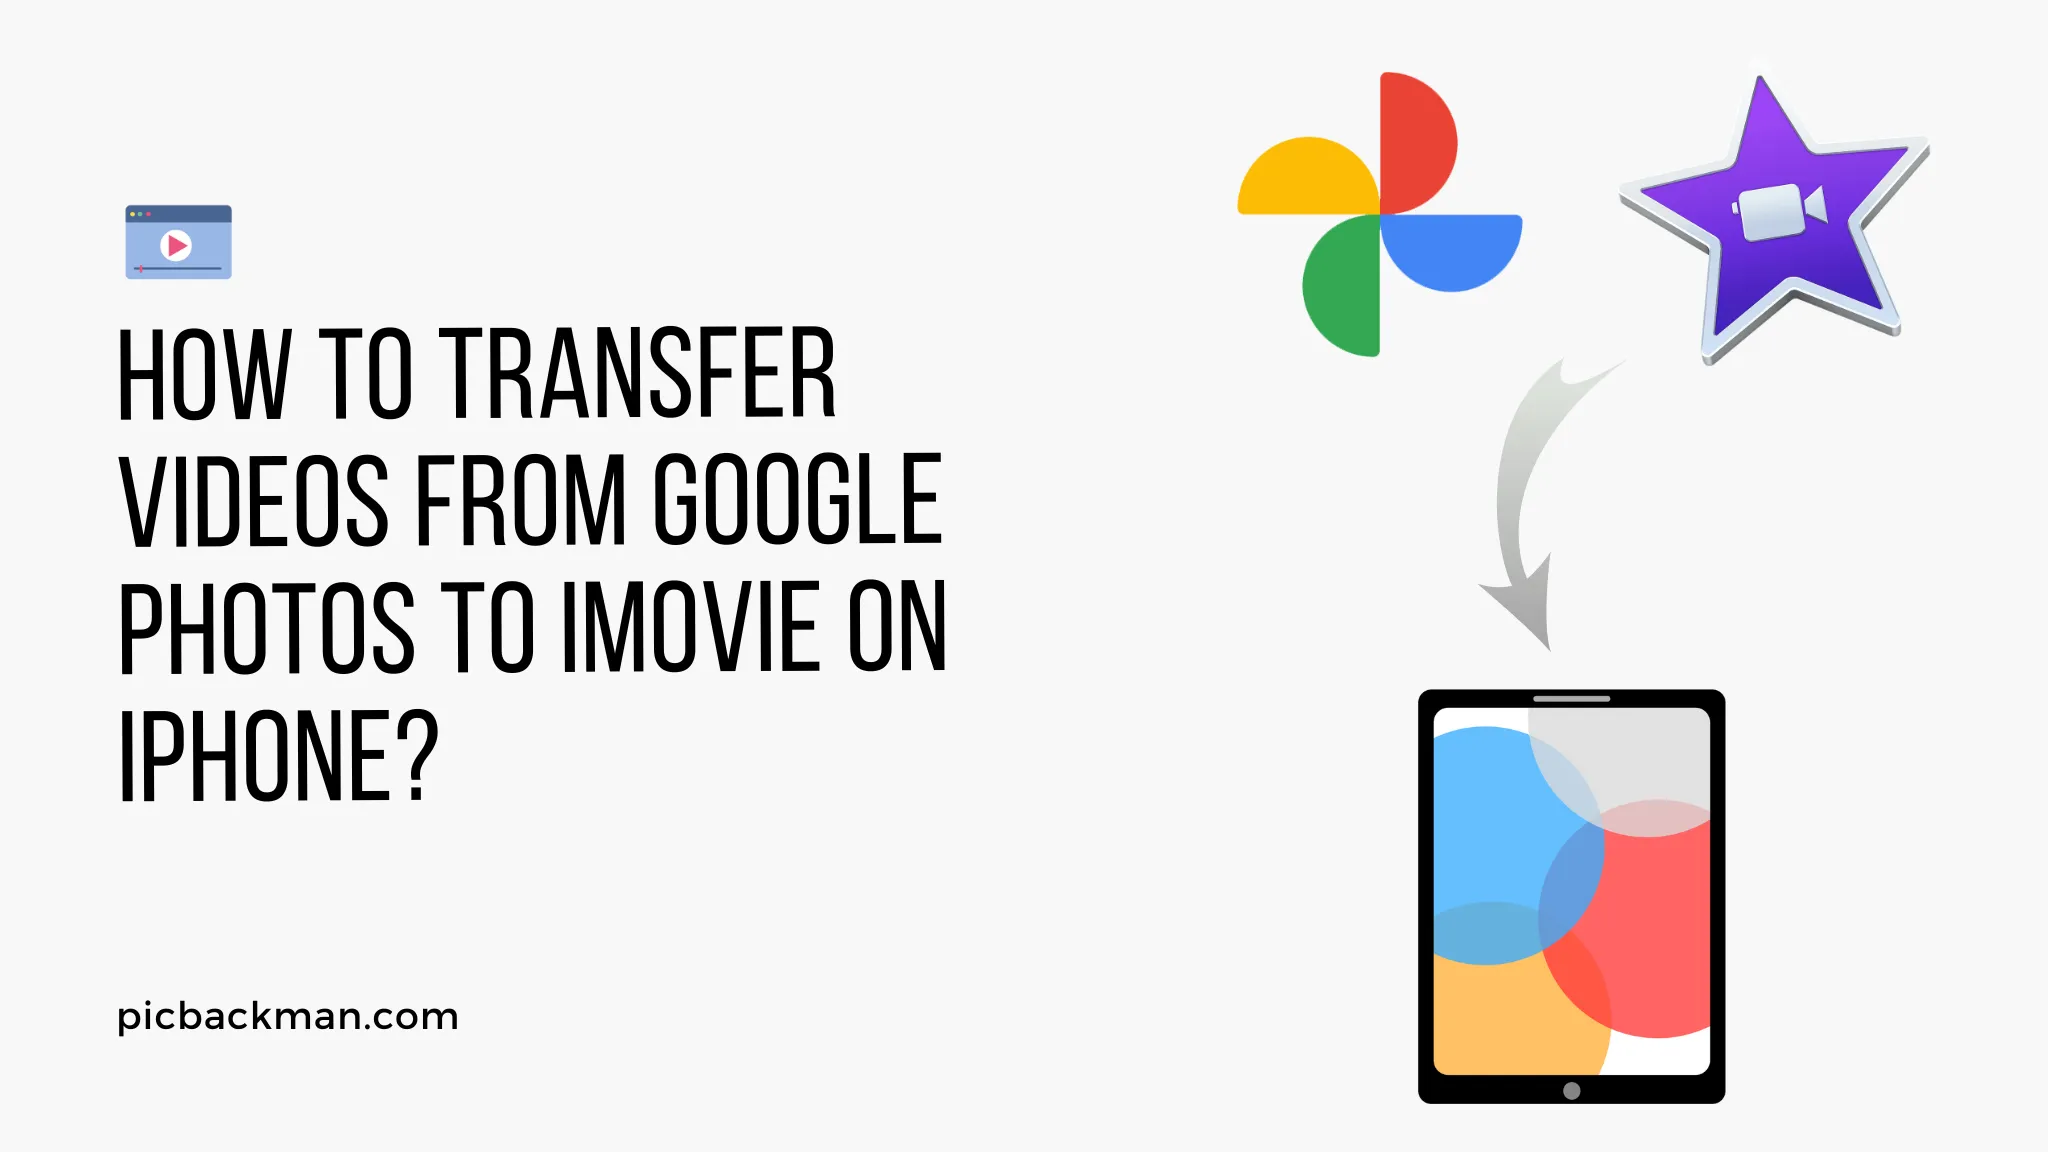 How to Transfer Videos from Google Photos to iMovie on iPhone